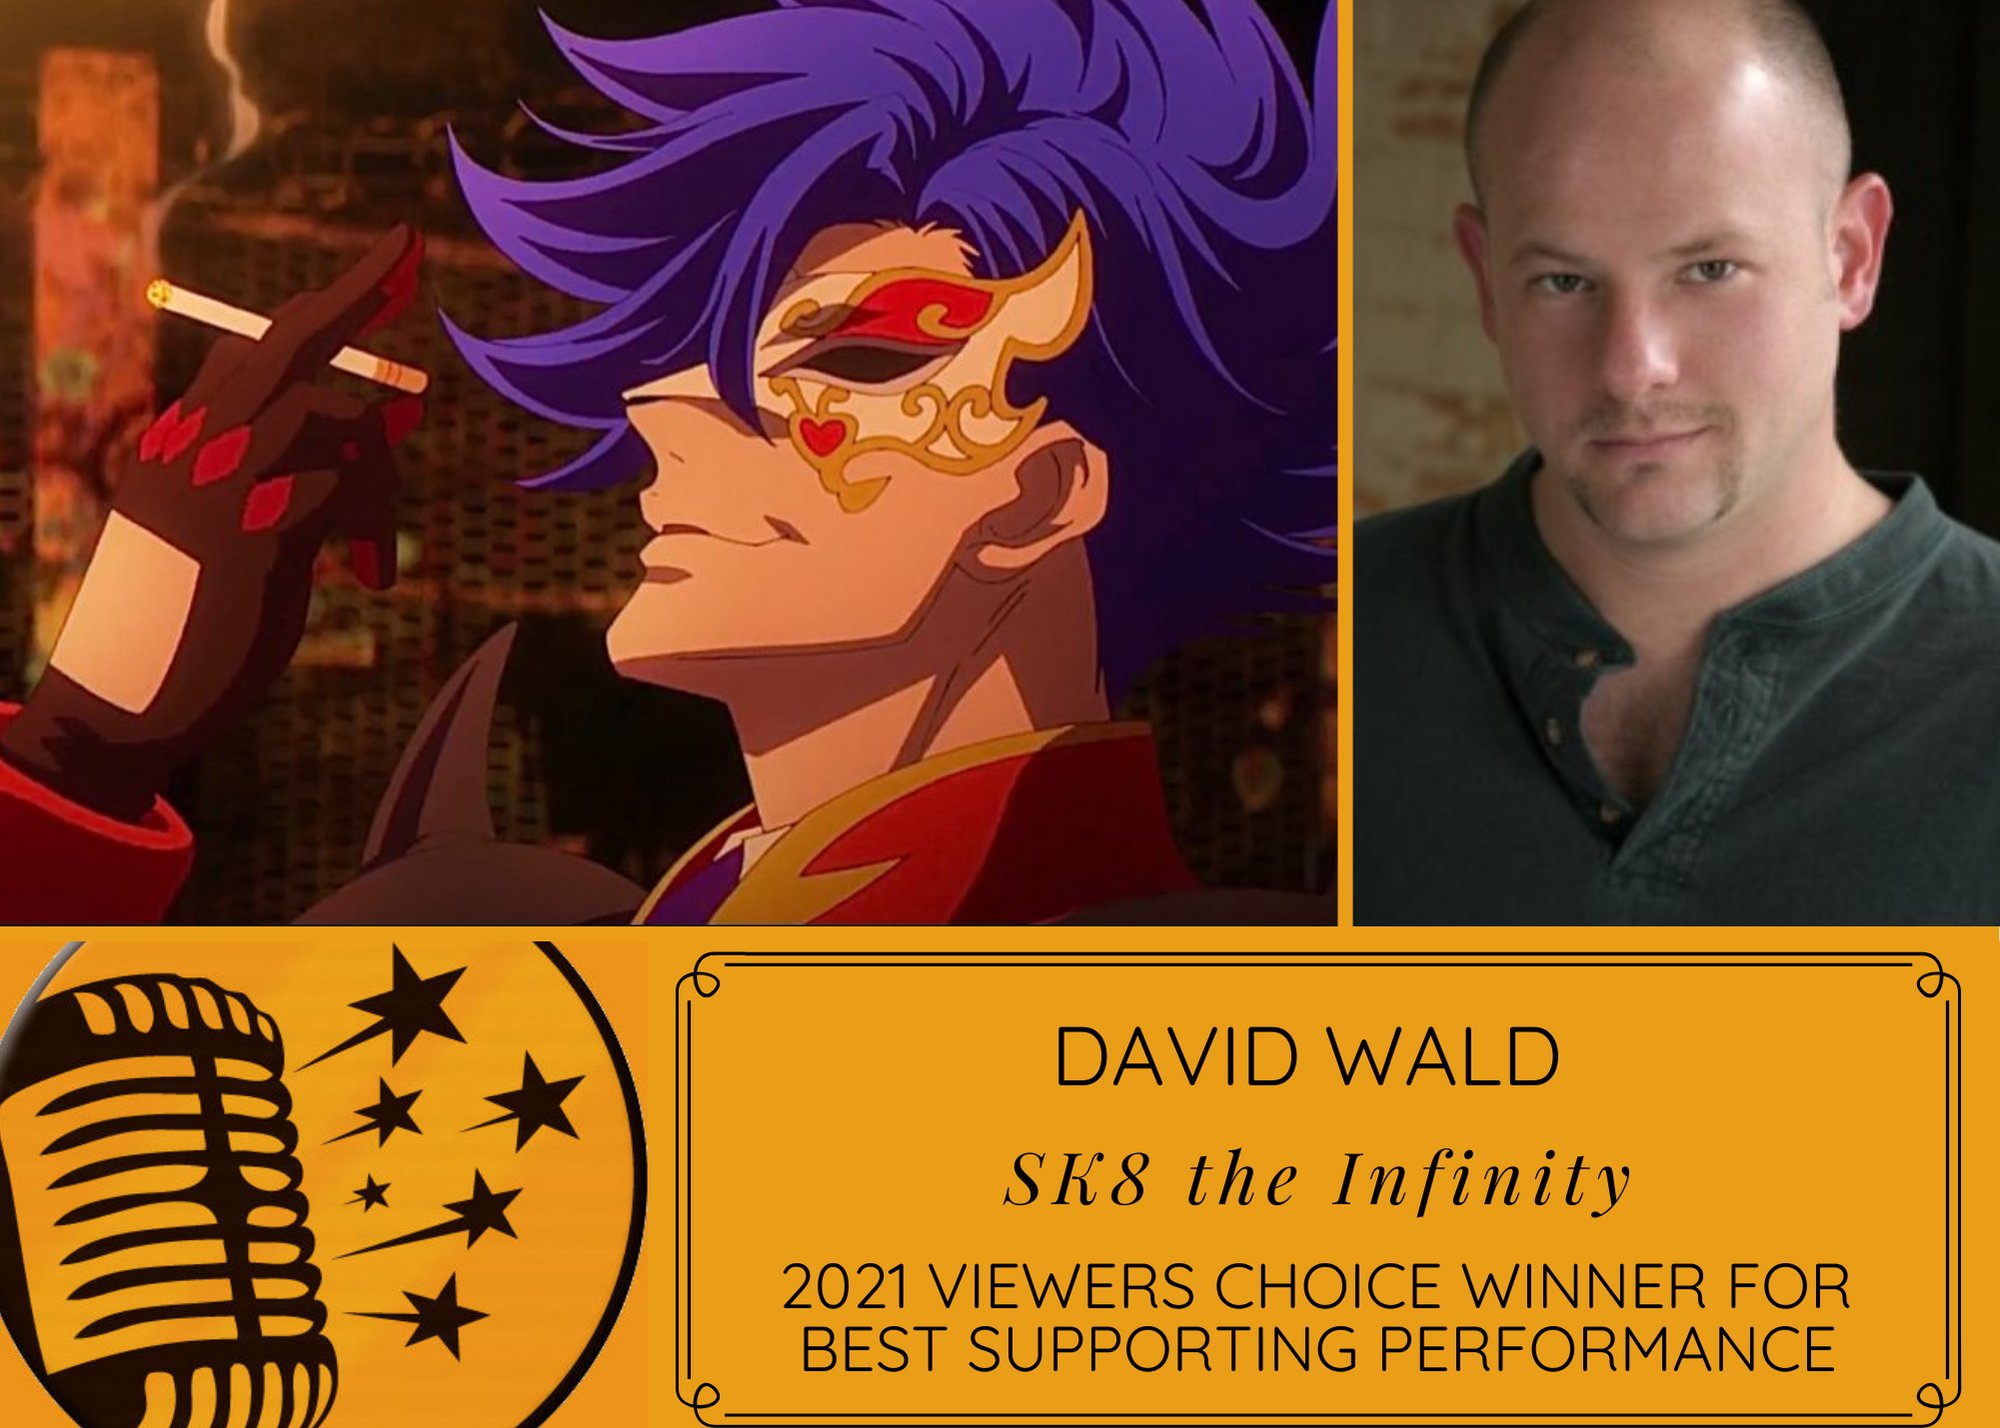 Why David Wald's Role as SK8 the Infinity's ADAM is Award-Winning